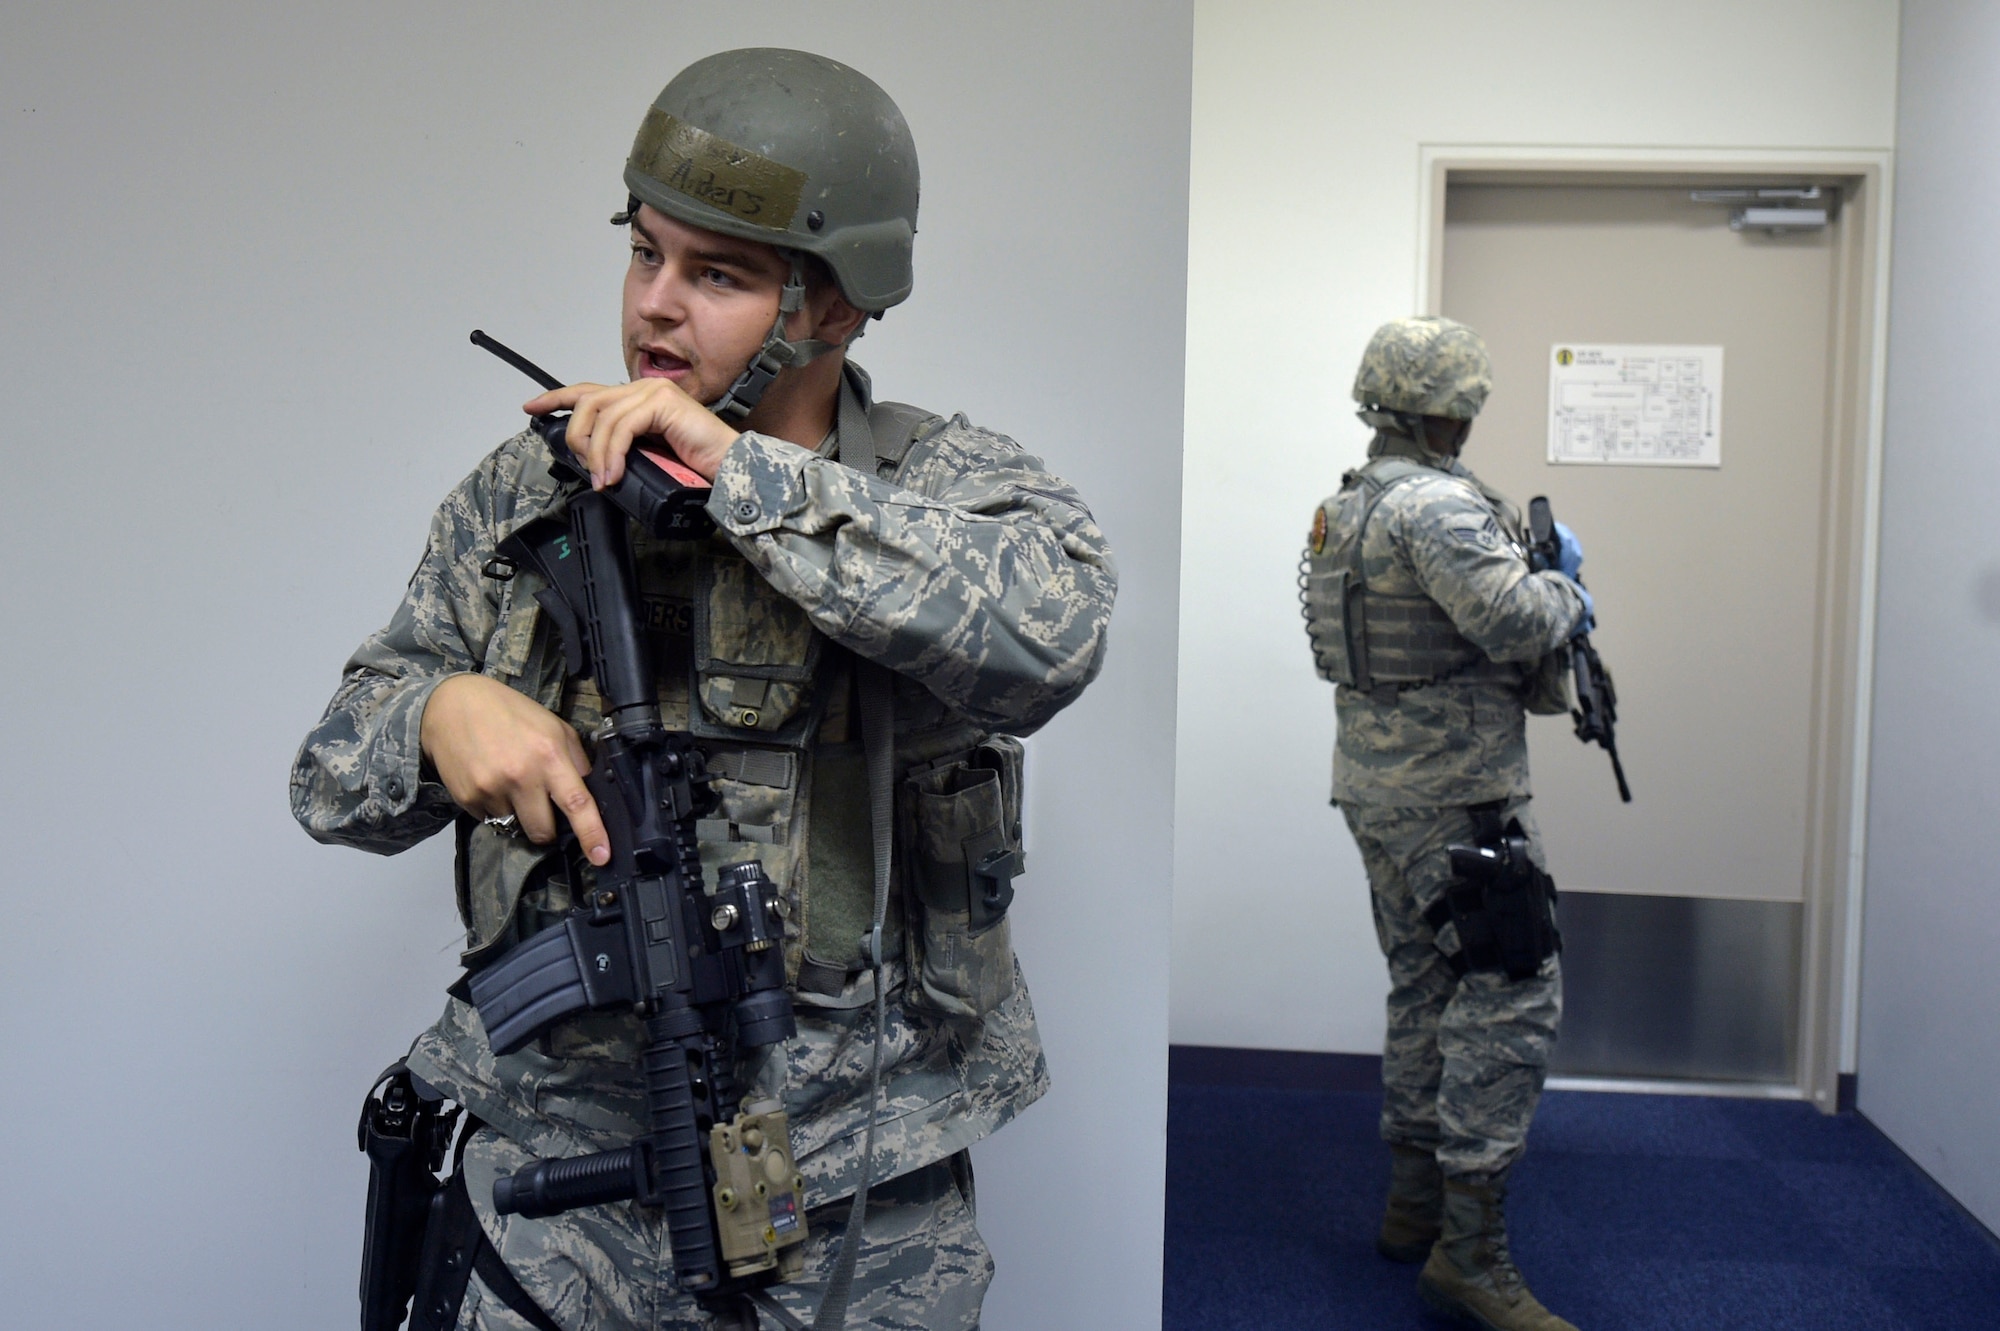 U.S. Air Force Senior Airman Daniel Anders, left, a 35th Security Forces Squadron defender, talks on a radio during an active shooter exercise at Misawa Air Base, Sept. 18, 2018. The exercise helped security forces personnel identify any short falls or limiting factors in their response capabilities. This aids in providing an effective and timely response to minimize the loss of life in the event of an active shooter. (U.S. Air Force photo by Tech. Sgt. Stephany Johnson)